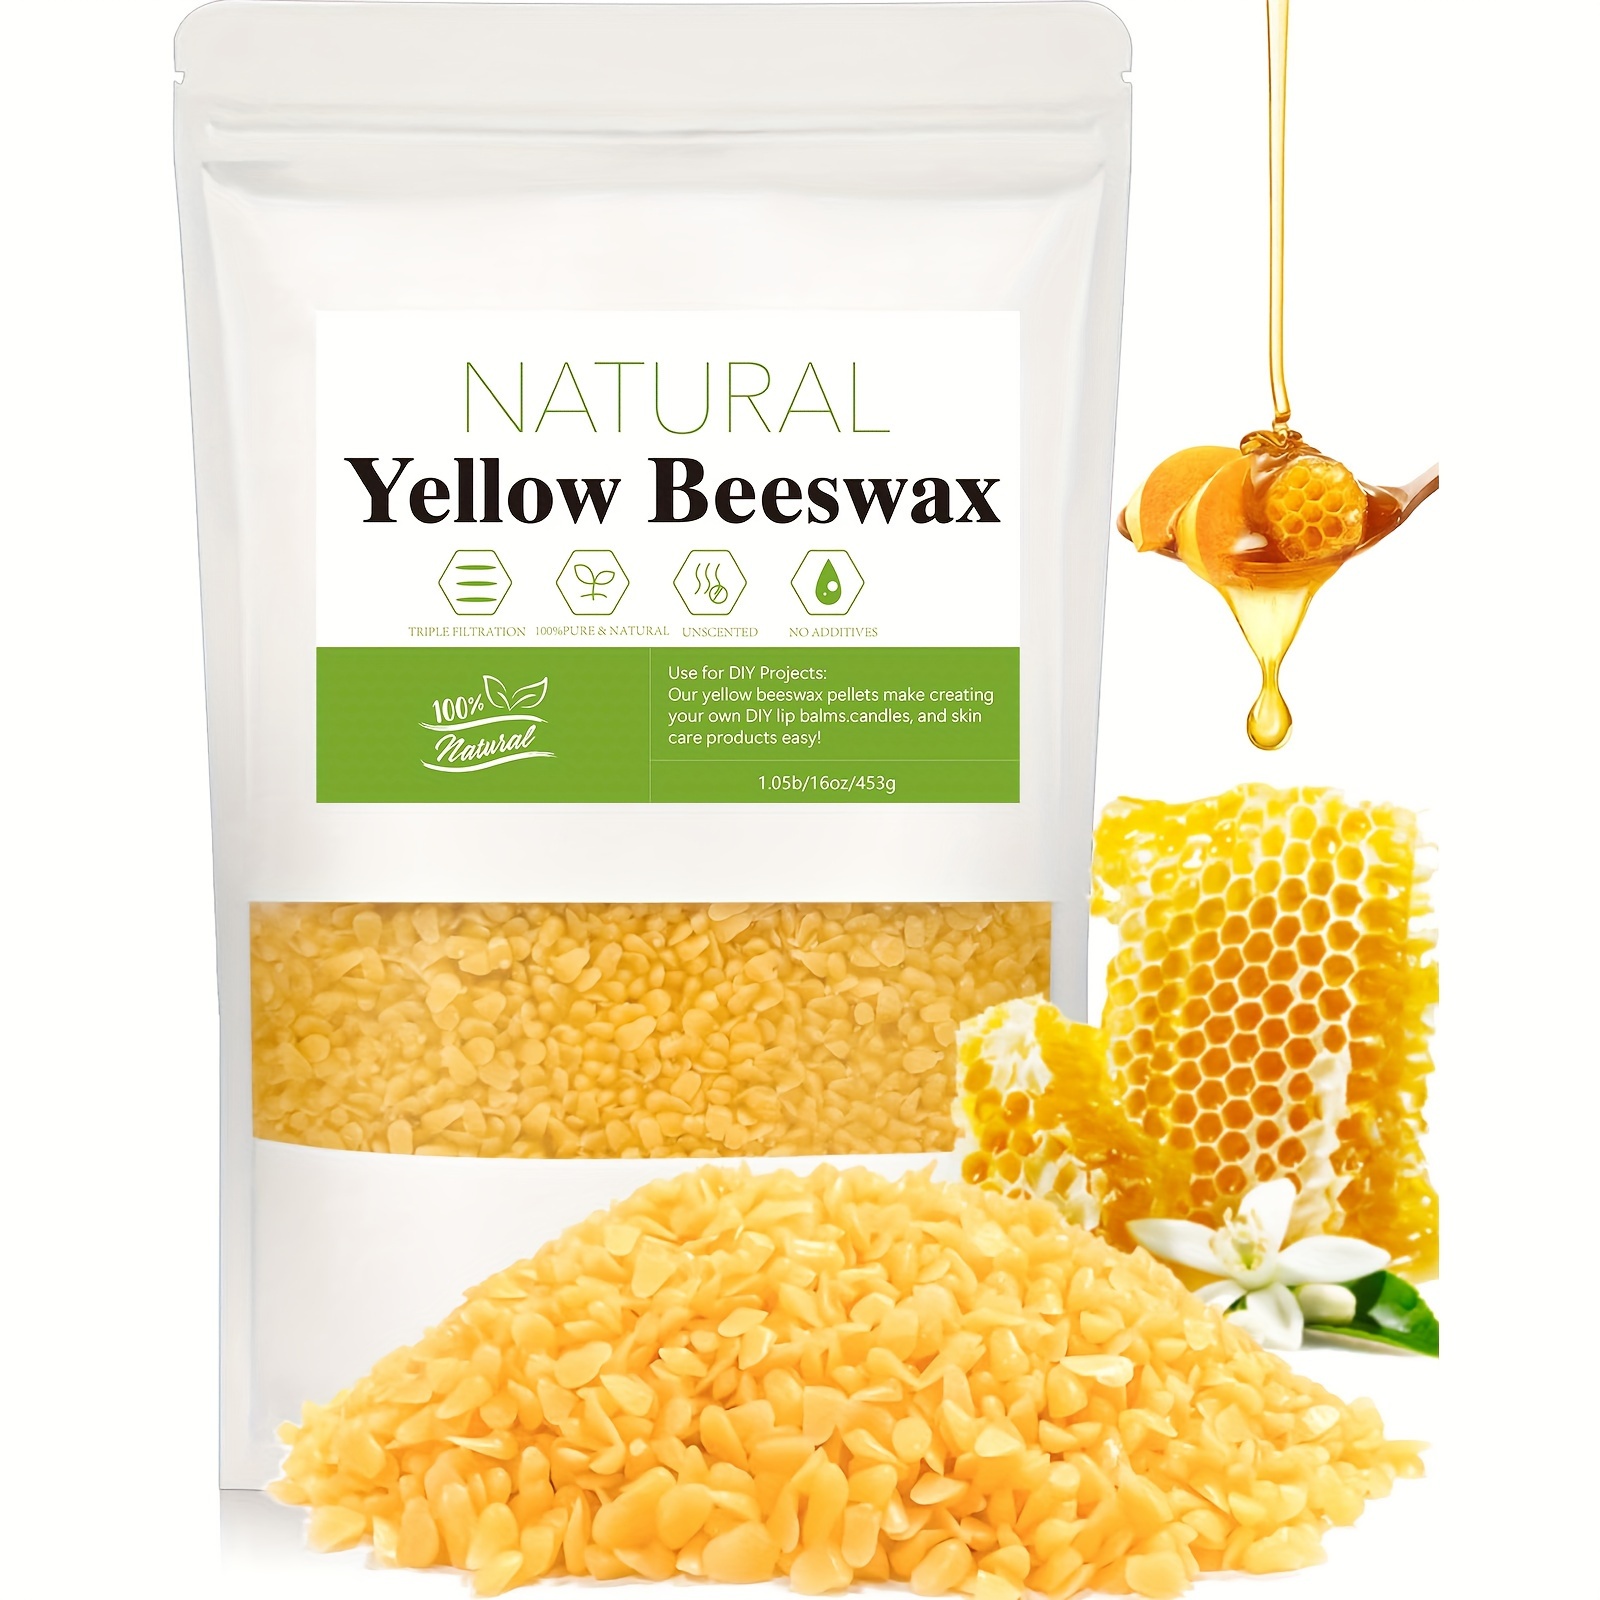 Organic Beeswax Pellets 8 oz, Yellow, Pure, Cosmetic Grade, Bees Wax  Pastilles, Triple Filtered, Great For DIY Projects, Lip Balms, Lotions,  Candles By White Naturals 